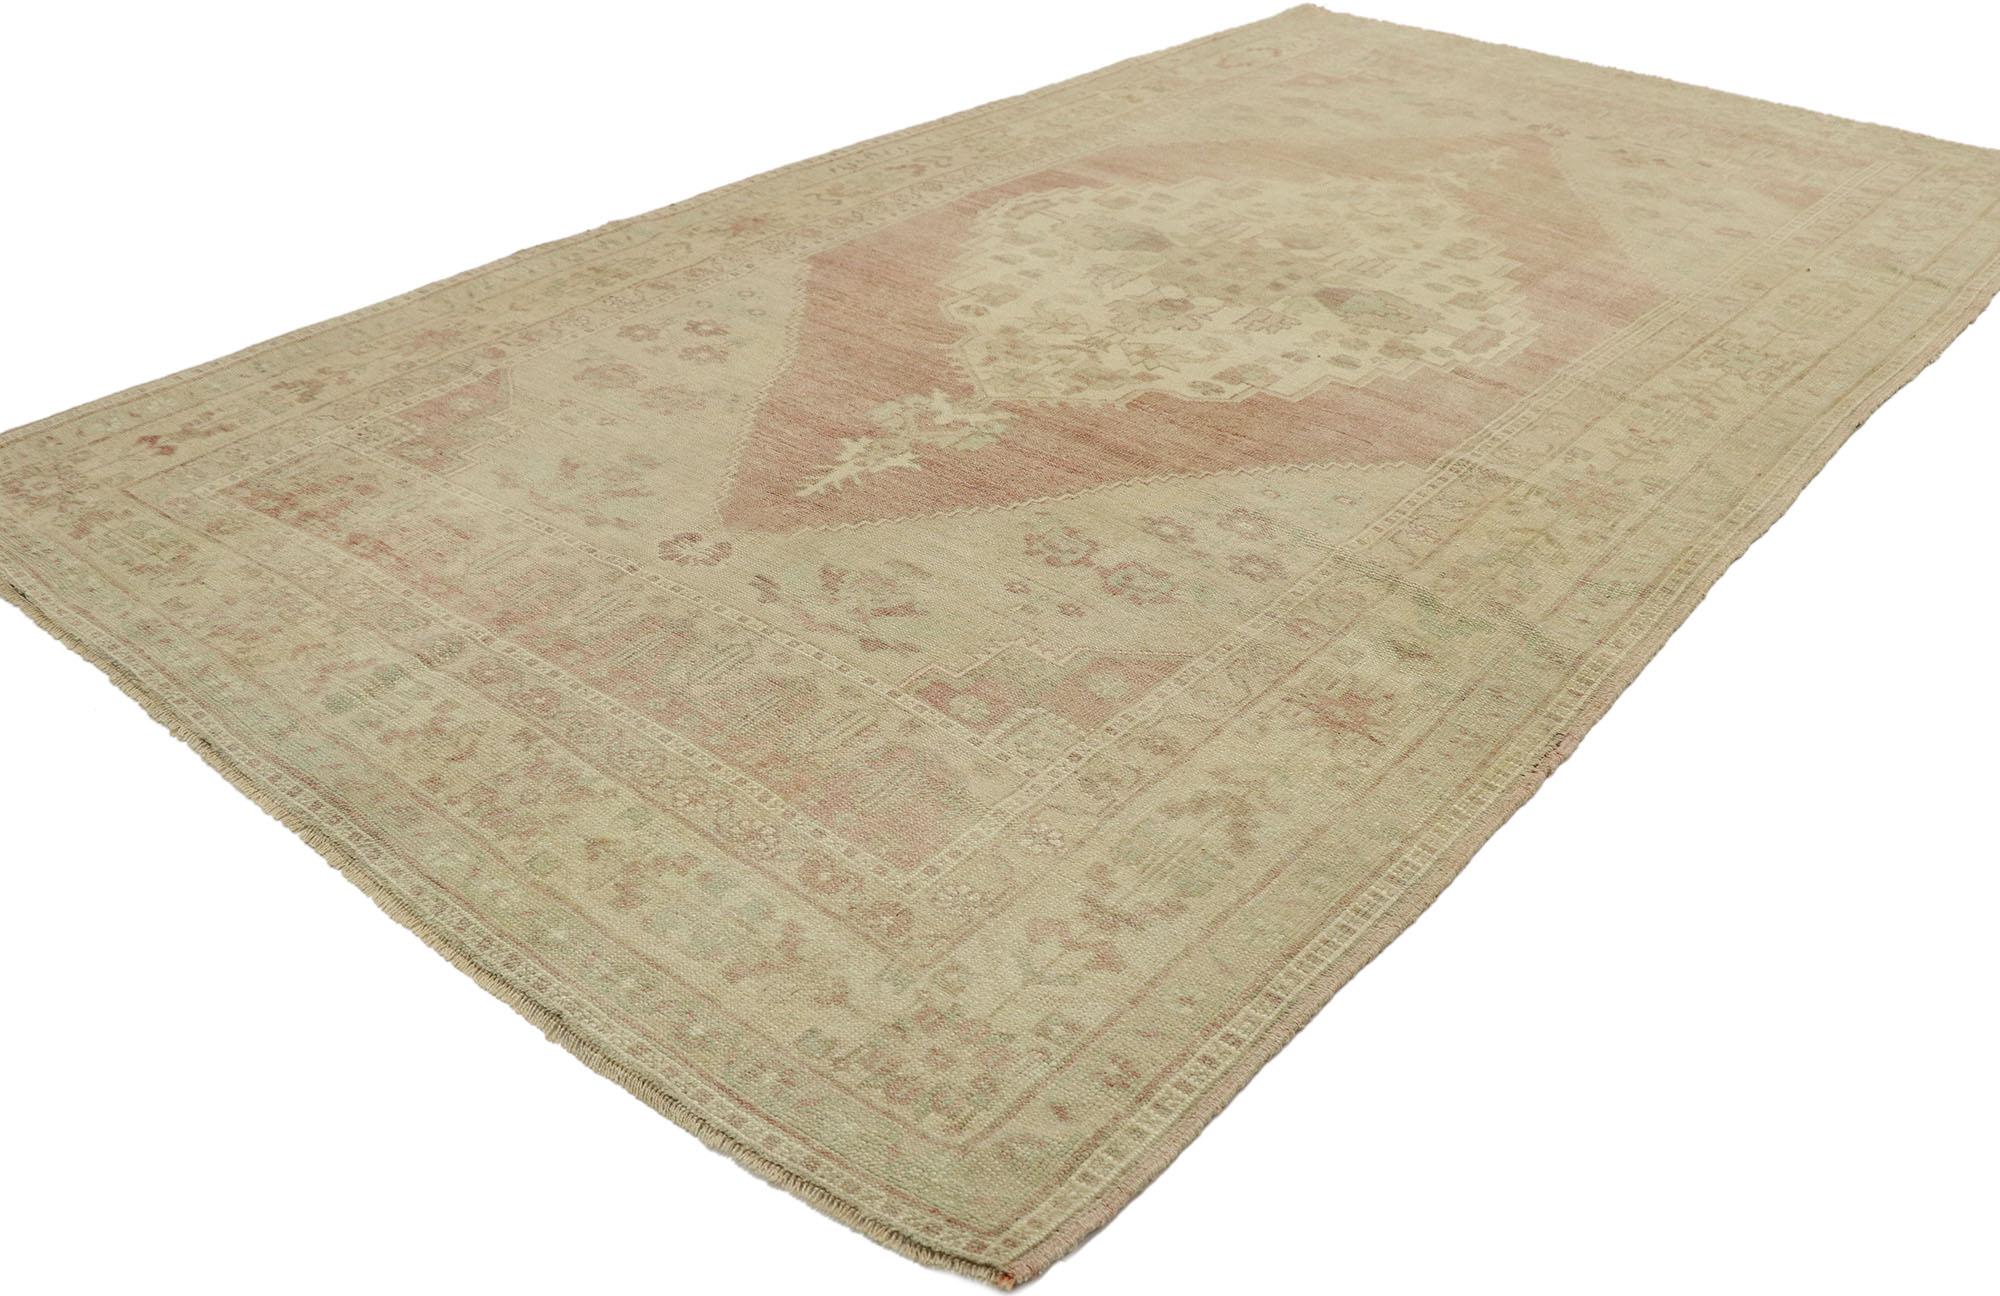 53213 Vintage Turkish Oushak Gallery rug with Rustic Arts & Crafts style. This hand knotted wool vintage Turkish Oushak gallery rug features a stepped diamond-shaped medallion with palmette pendants floating in the center of an abrashed terra cotta